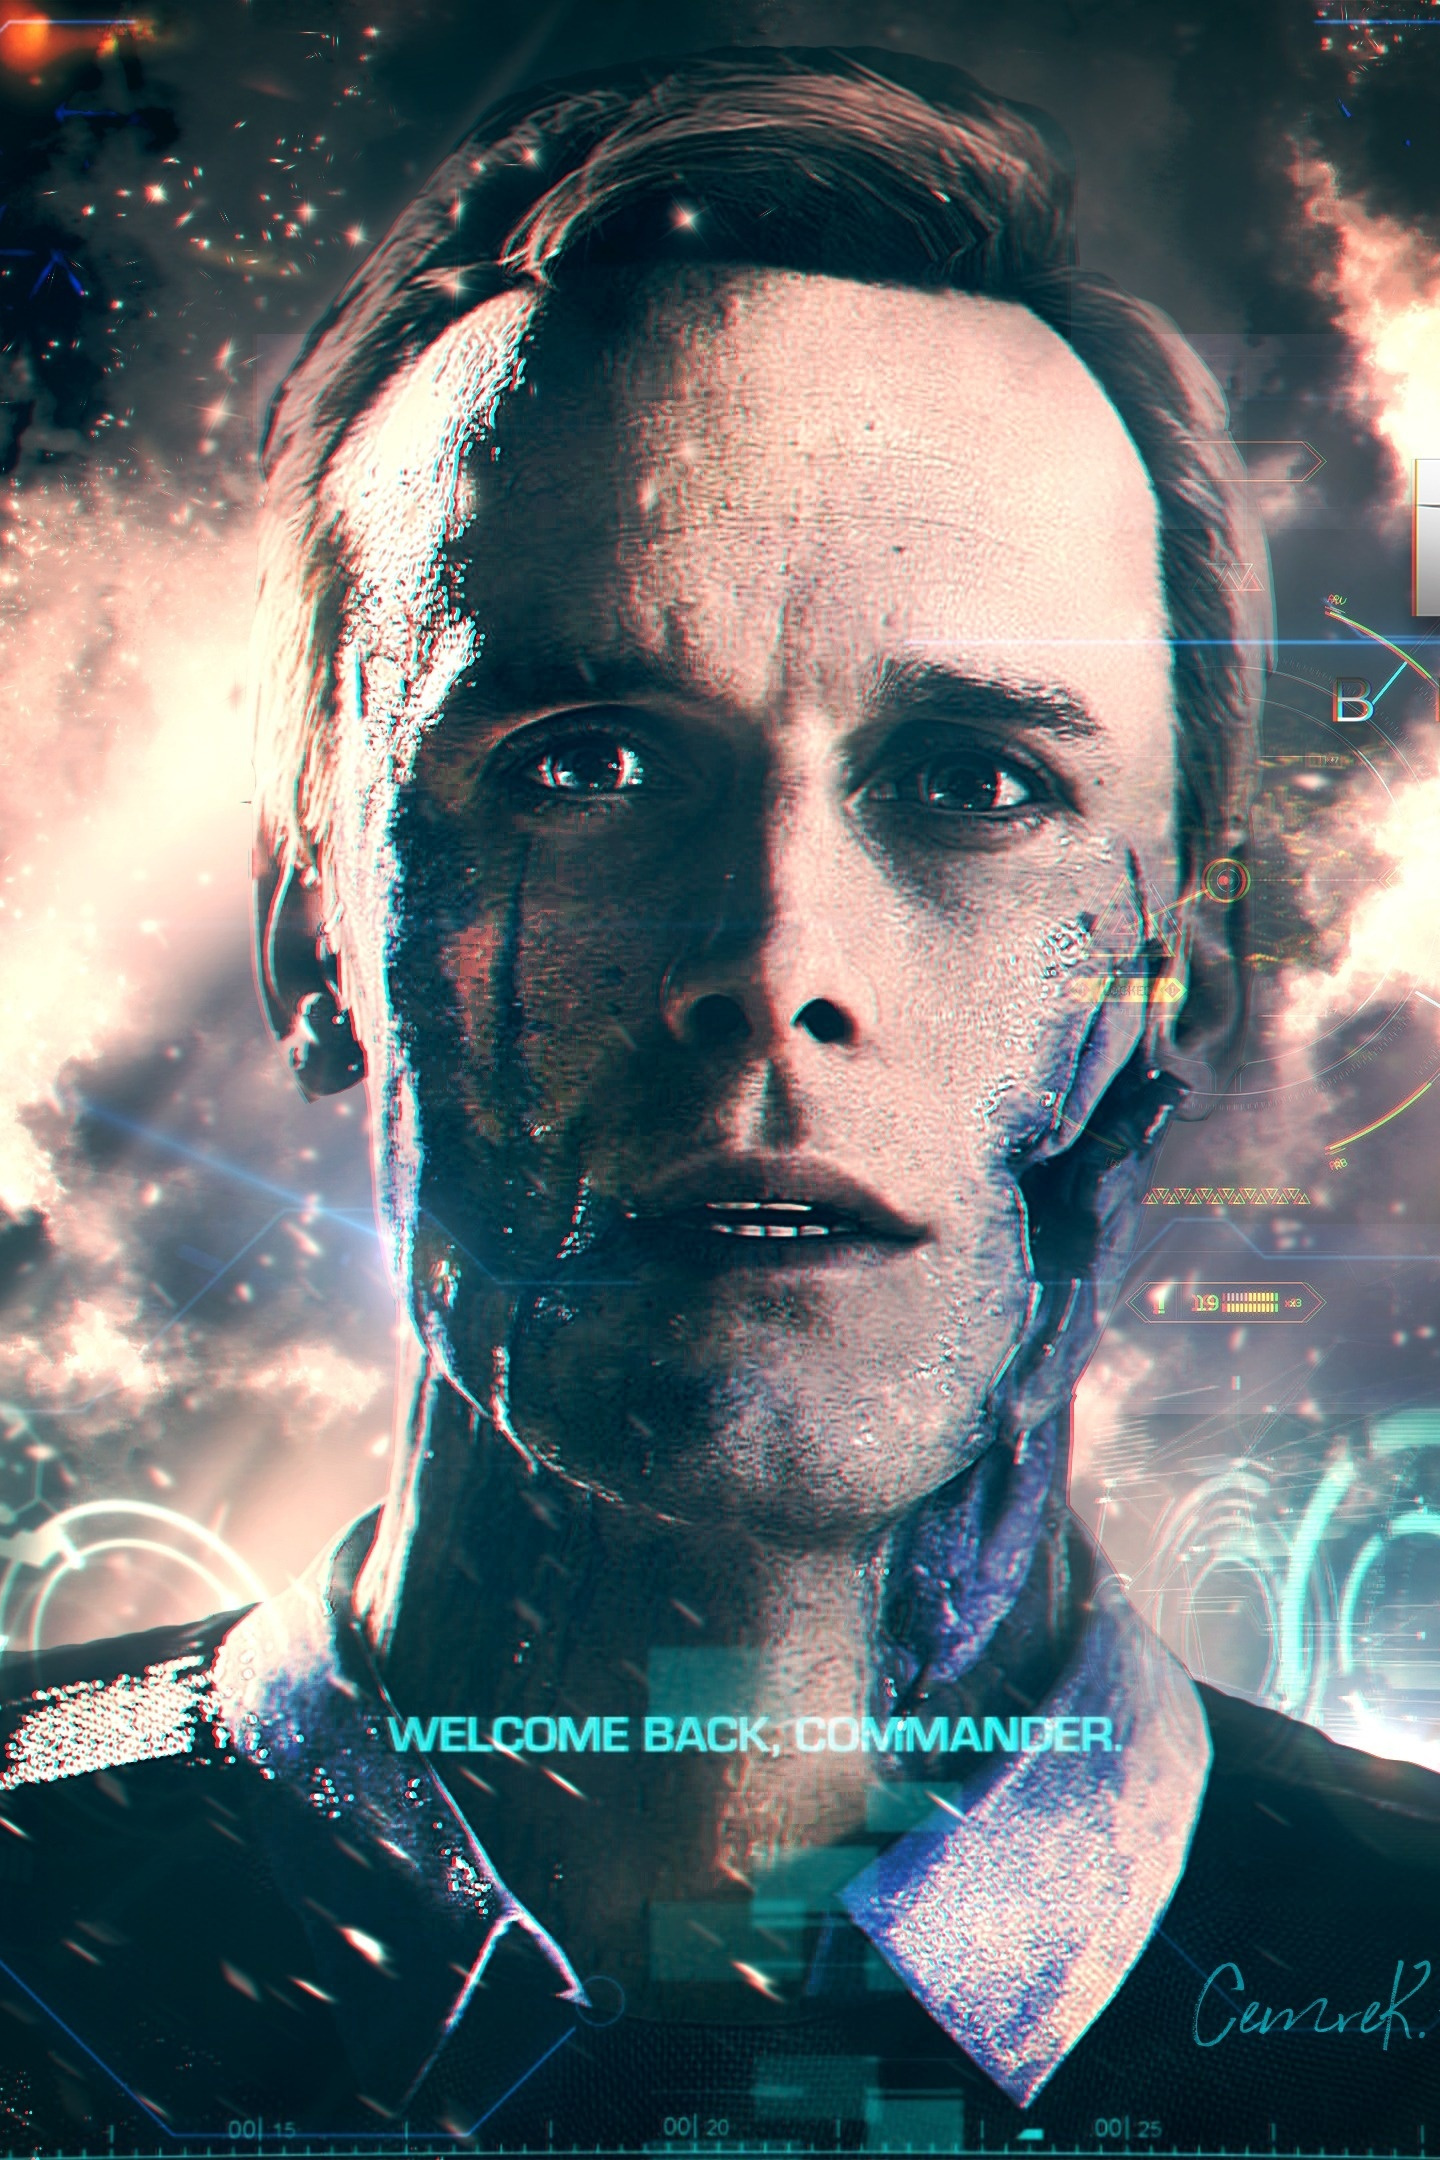 Download 1440x2960 wallpaper detroit: become human, video game